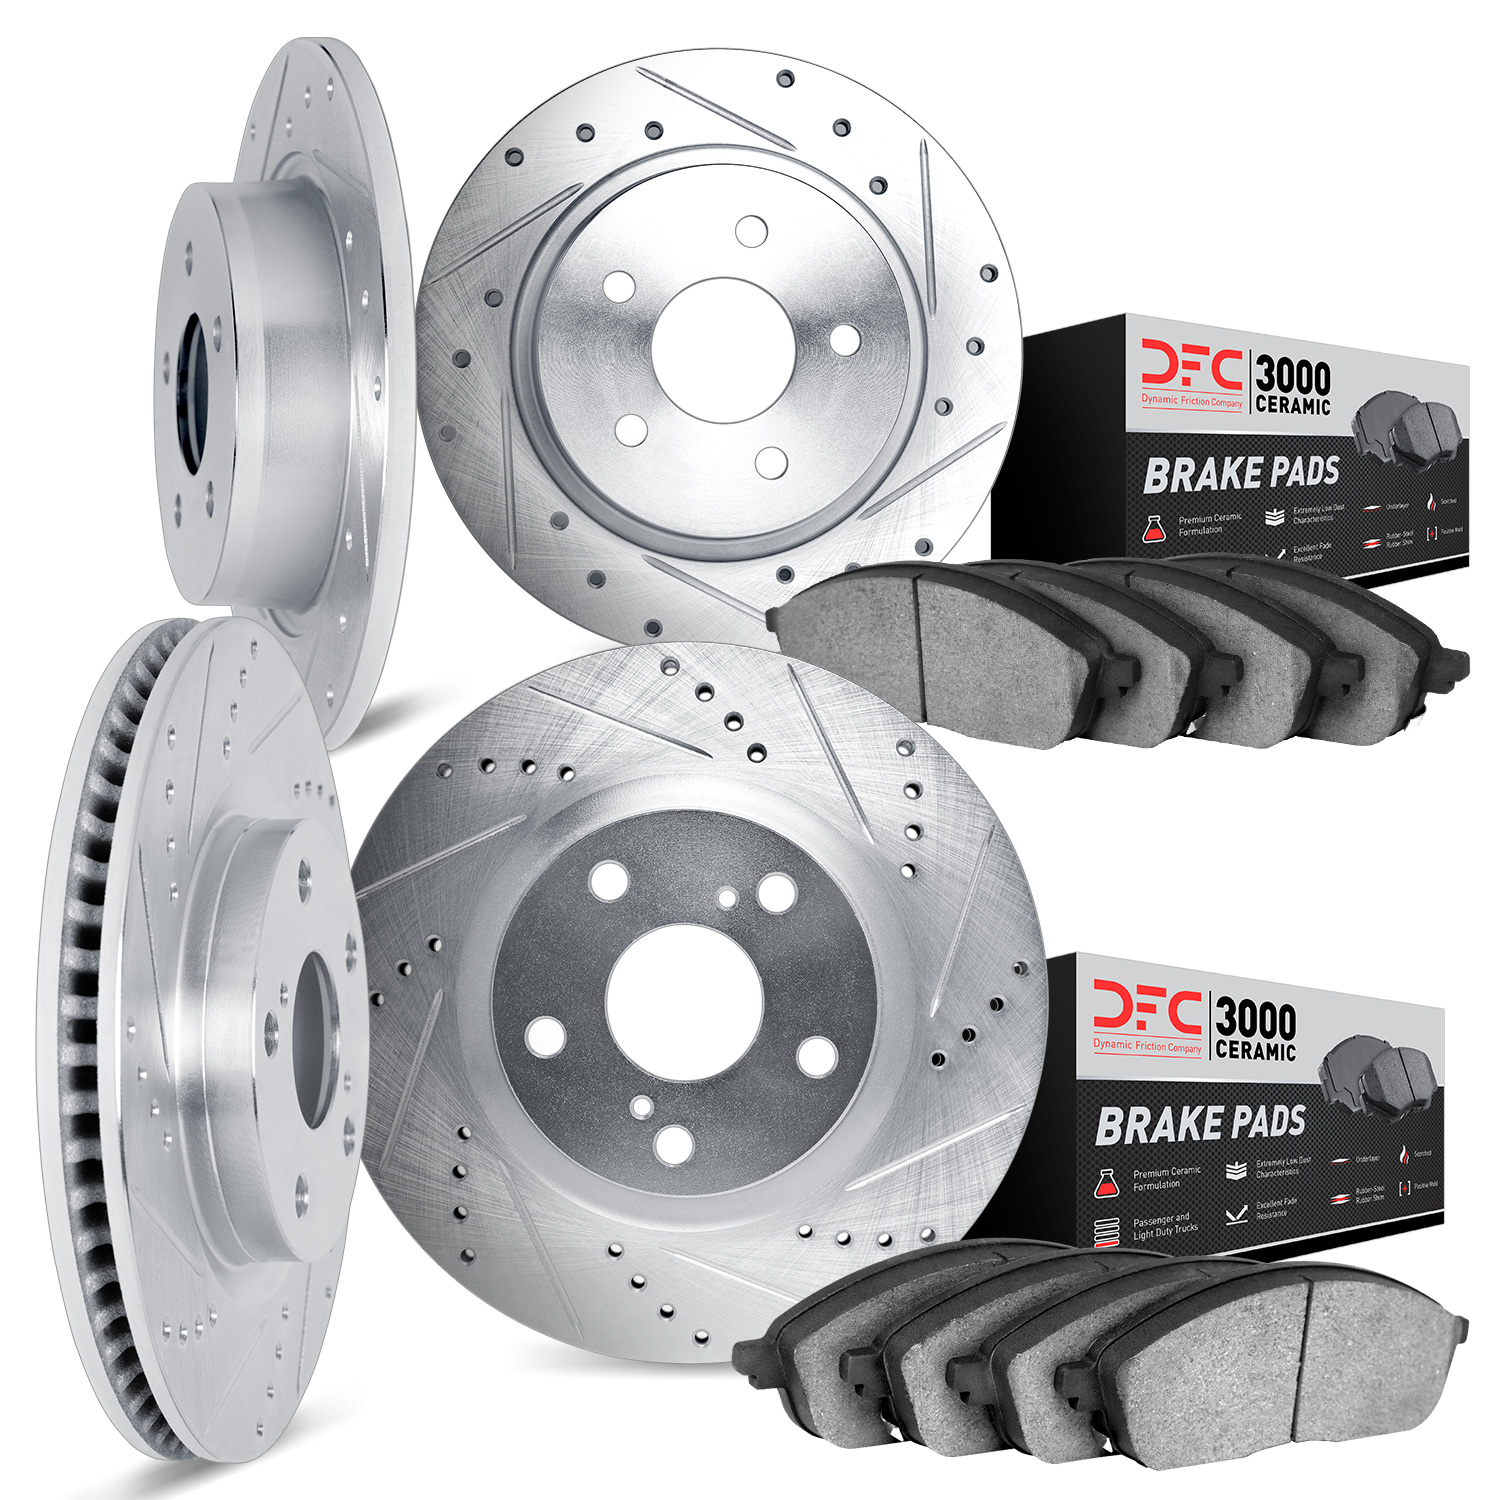 7304-55003 Drilled/Slotted Brake Rotor with 3000-Series Ceramic Brake Pads Kit [Silver], 2015-2020 Ford/Lincoln/Mercury/Mazda, P